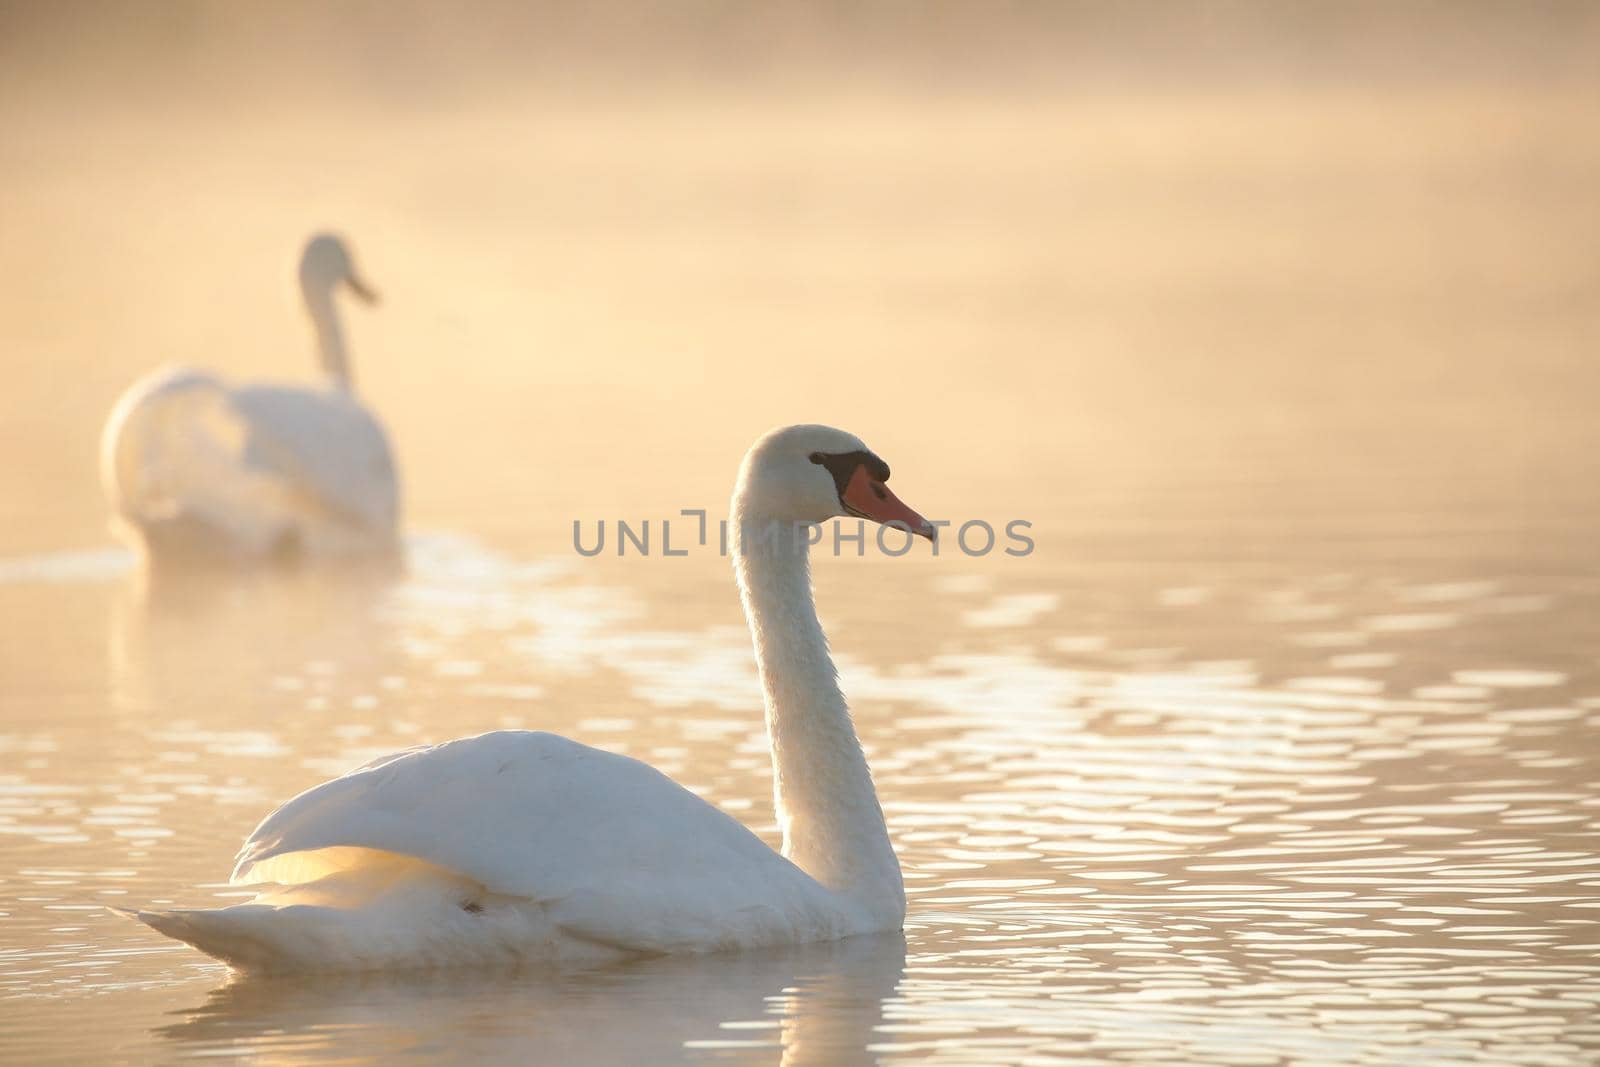 Swans at dawn by nature78